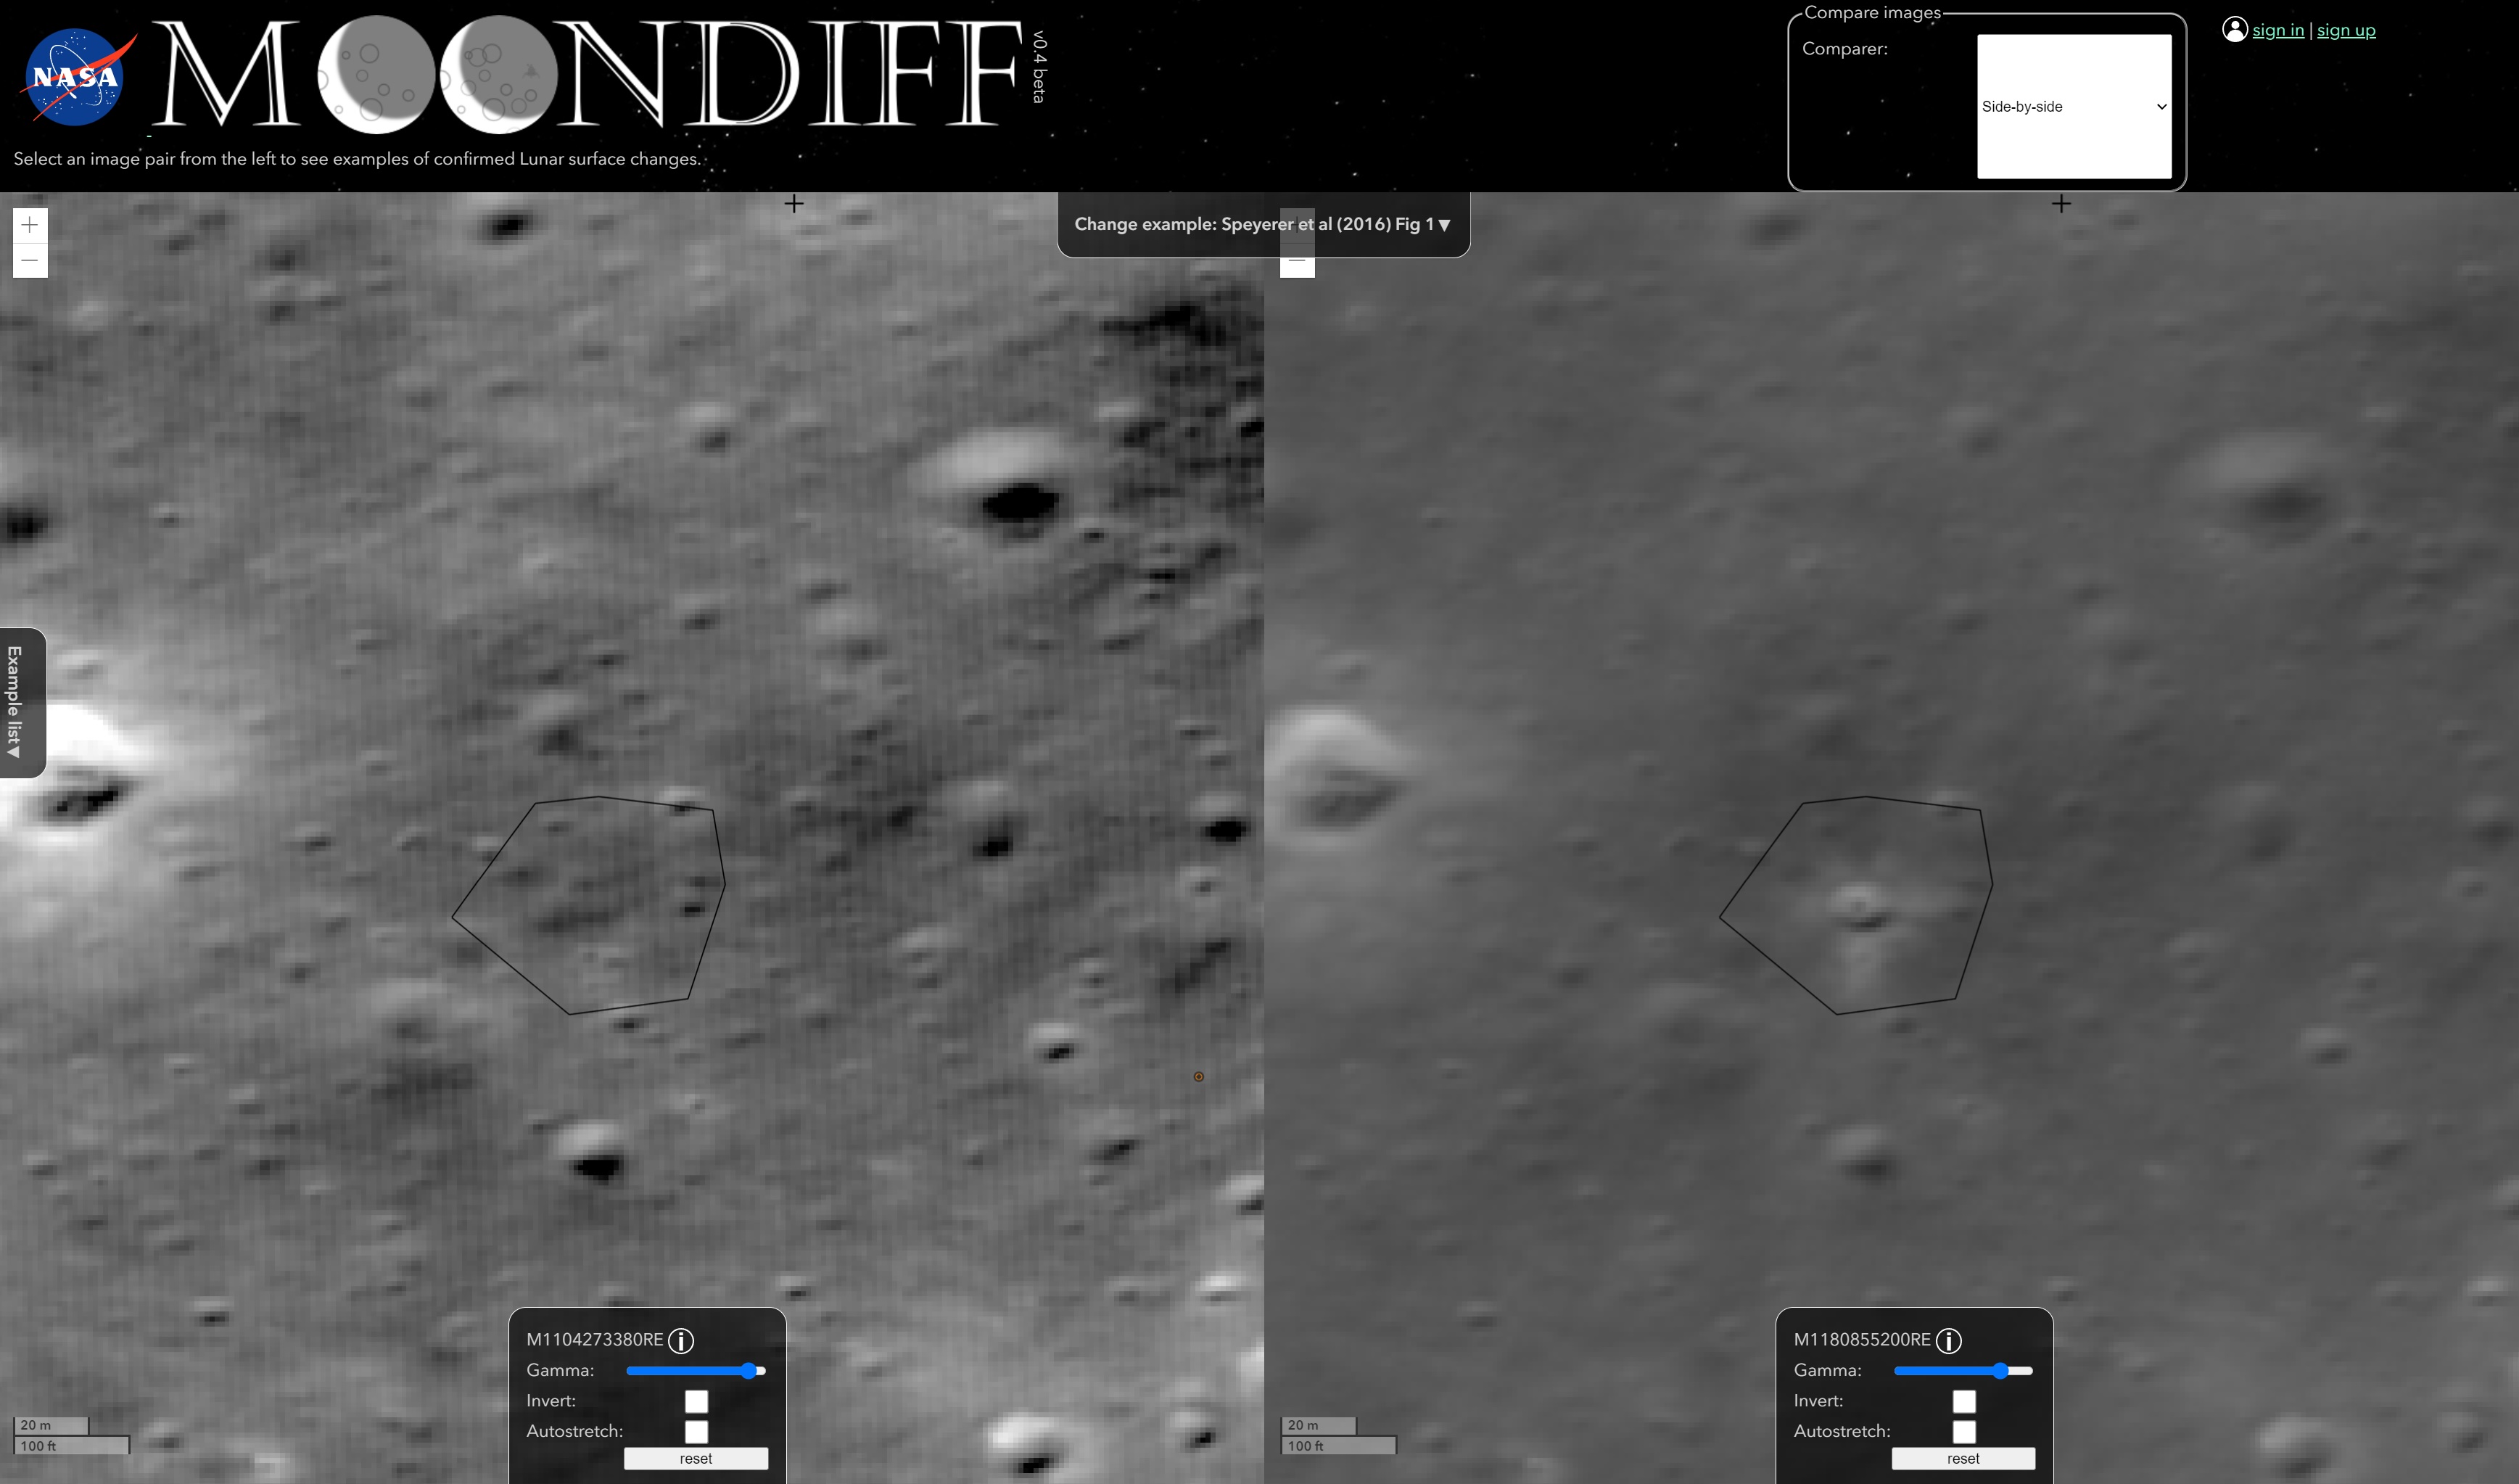 A comparison of two lunar surface images showing changes over time. The left image (M1104273380RE) displays a section of the Moon's surface with various craters and terrain features, while the right image (M1180555200RE) shows the same area at a different time, highlighting changes within the outlined hexagonal region. The images are presented side-by-side using NASA's MoonDiff tool, which allows for detailed examination of lunar surface changes. Each image has controls for adjusting gamma, inverting colors, and autostretching for better visibility of surface details.